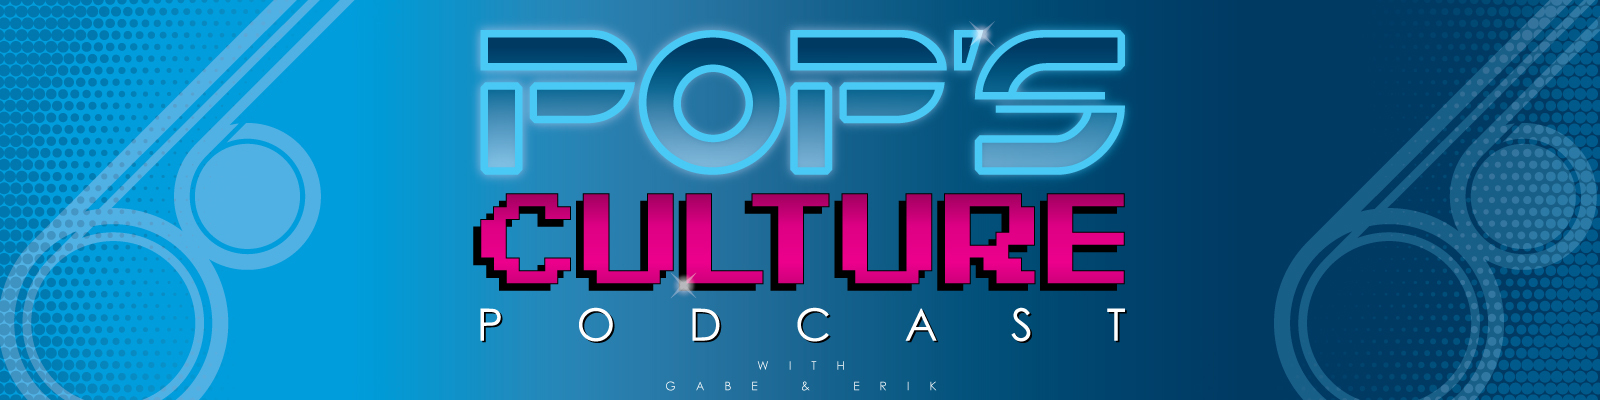 Pop's Culture Podcast